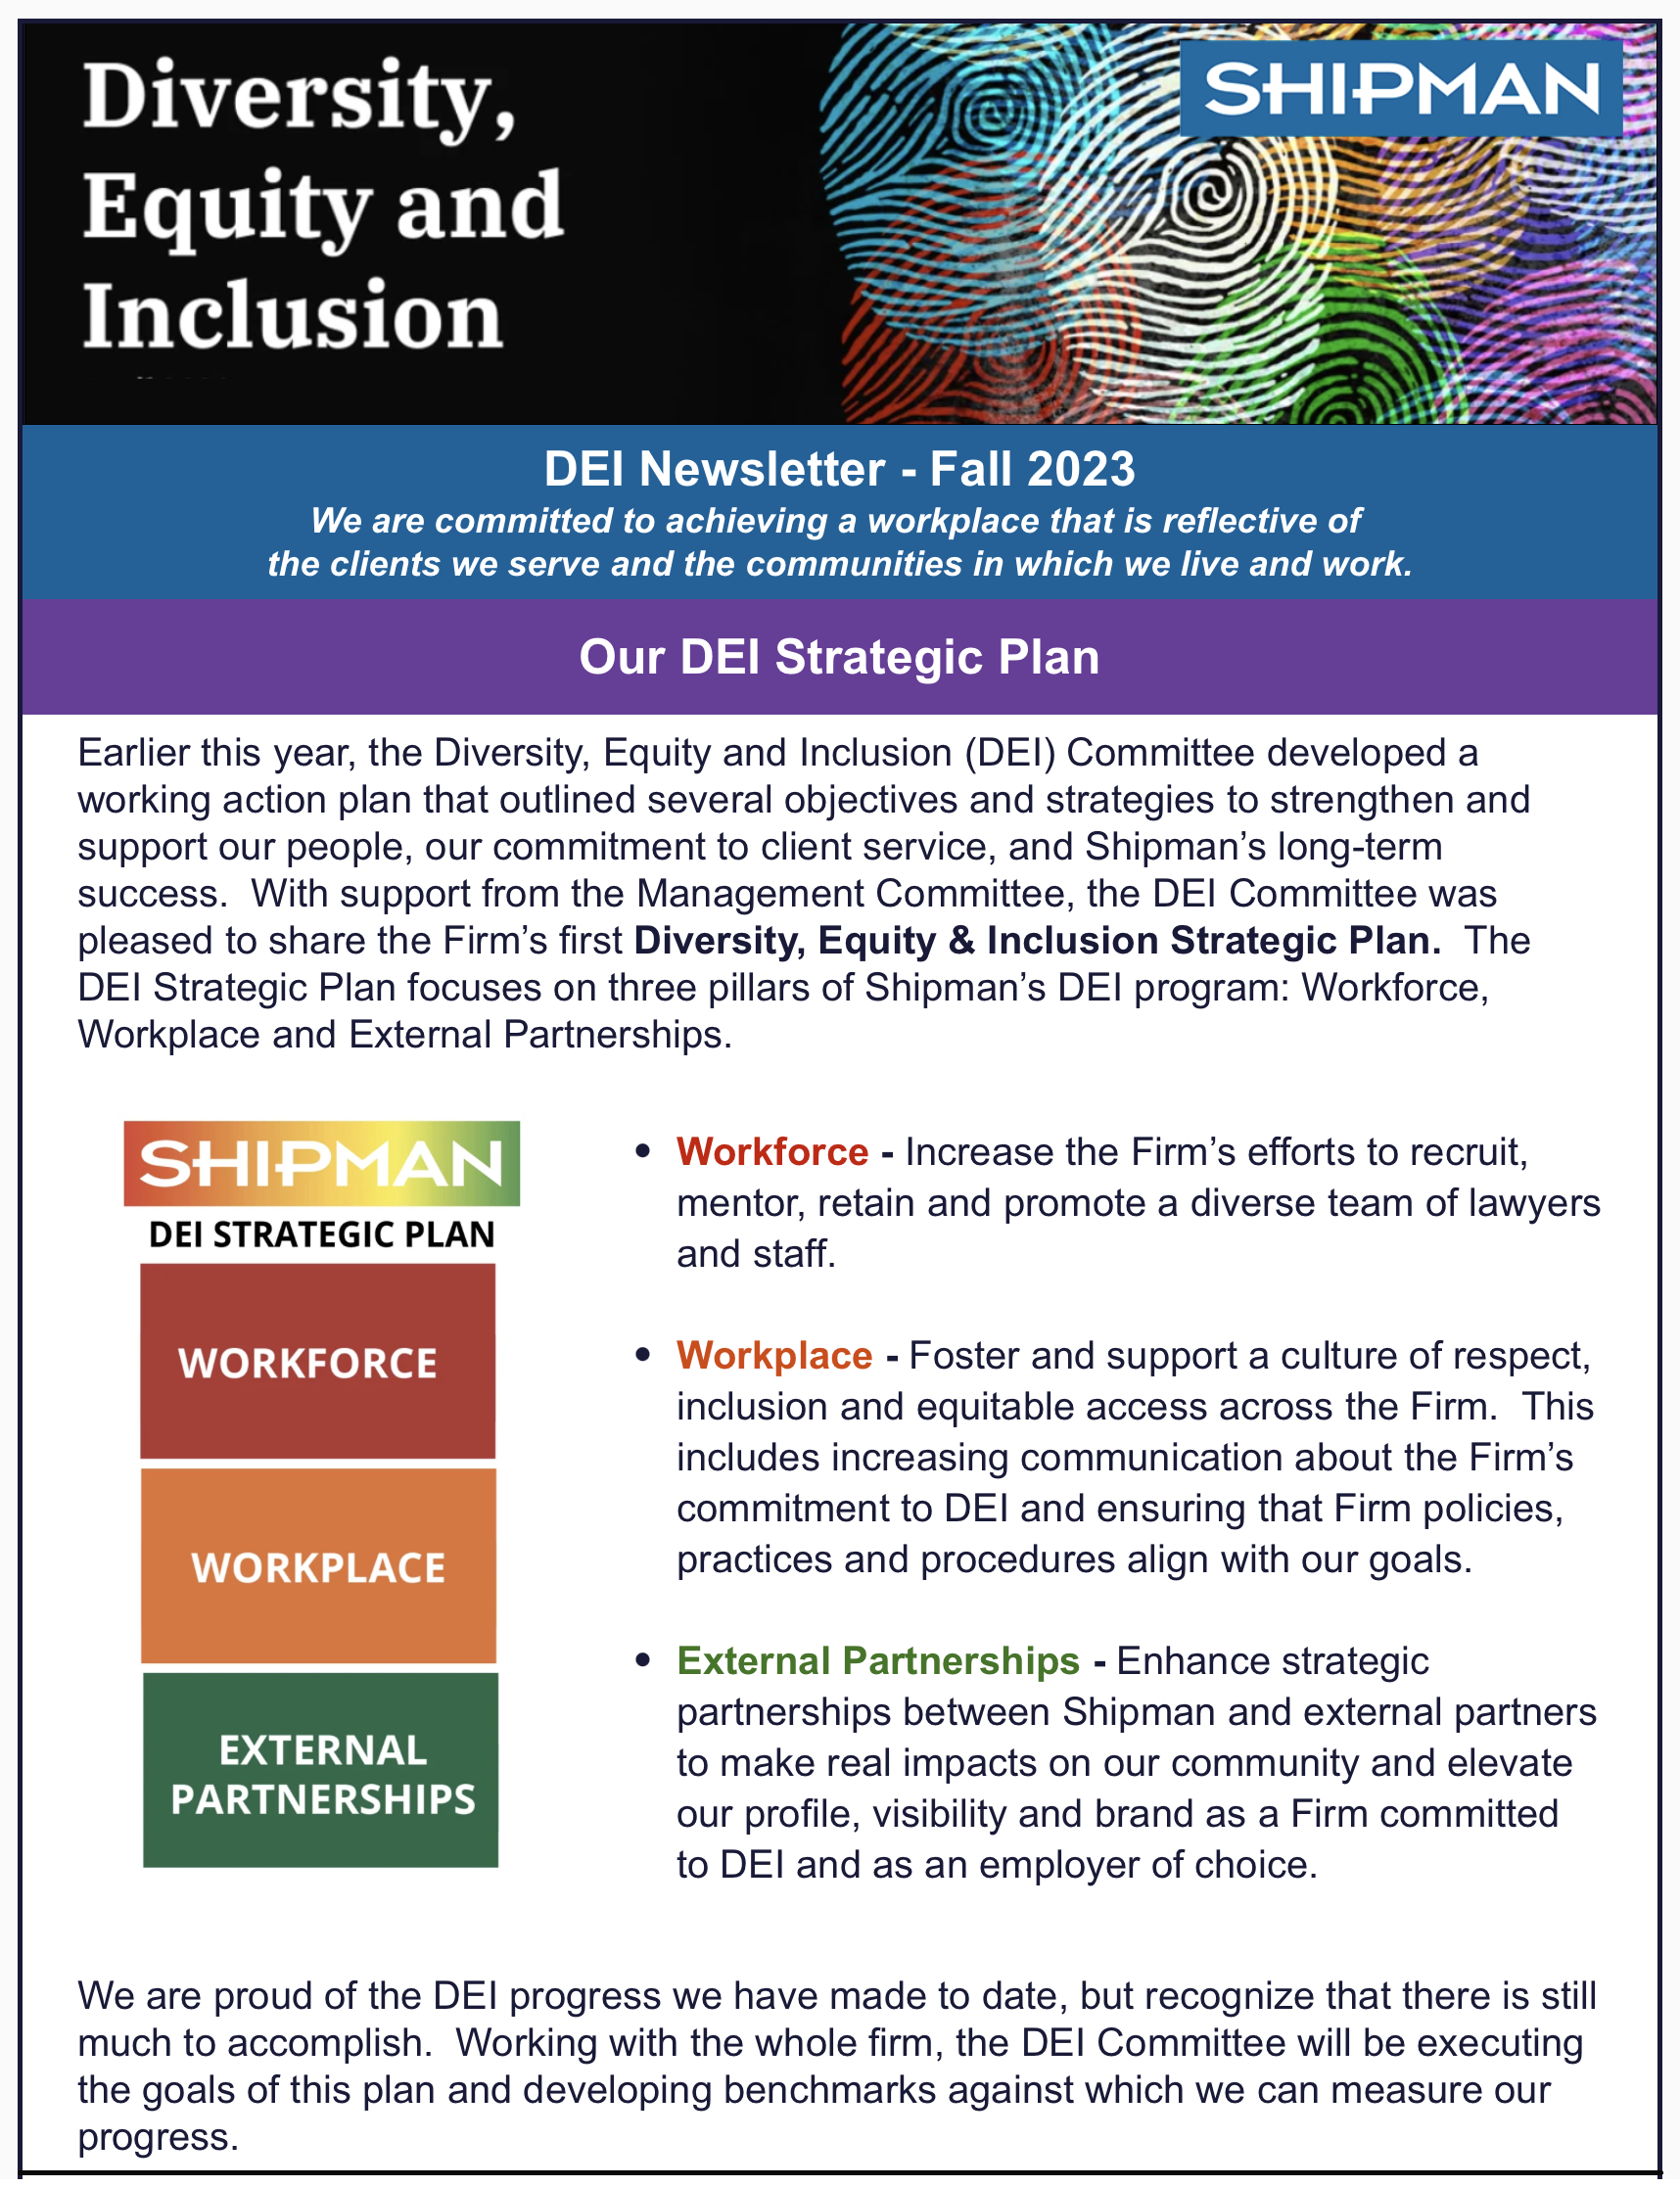 Diversity, Equity and Inclusion Cover image fall 2023